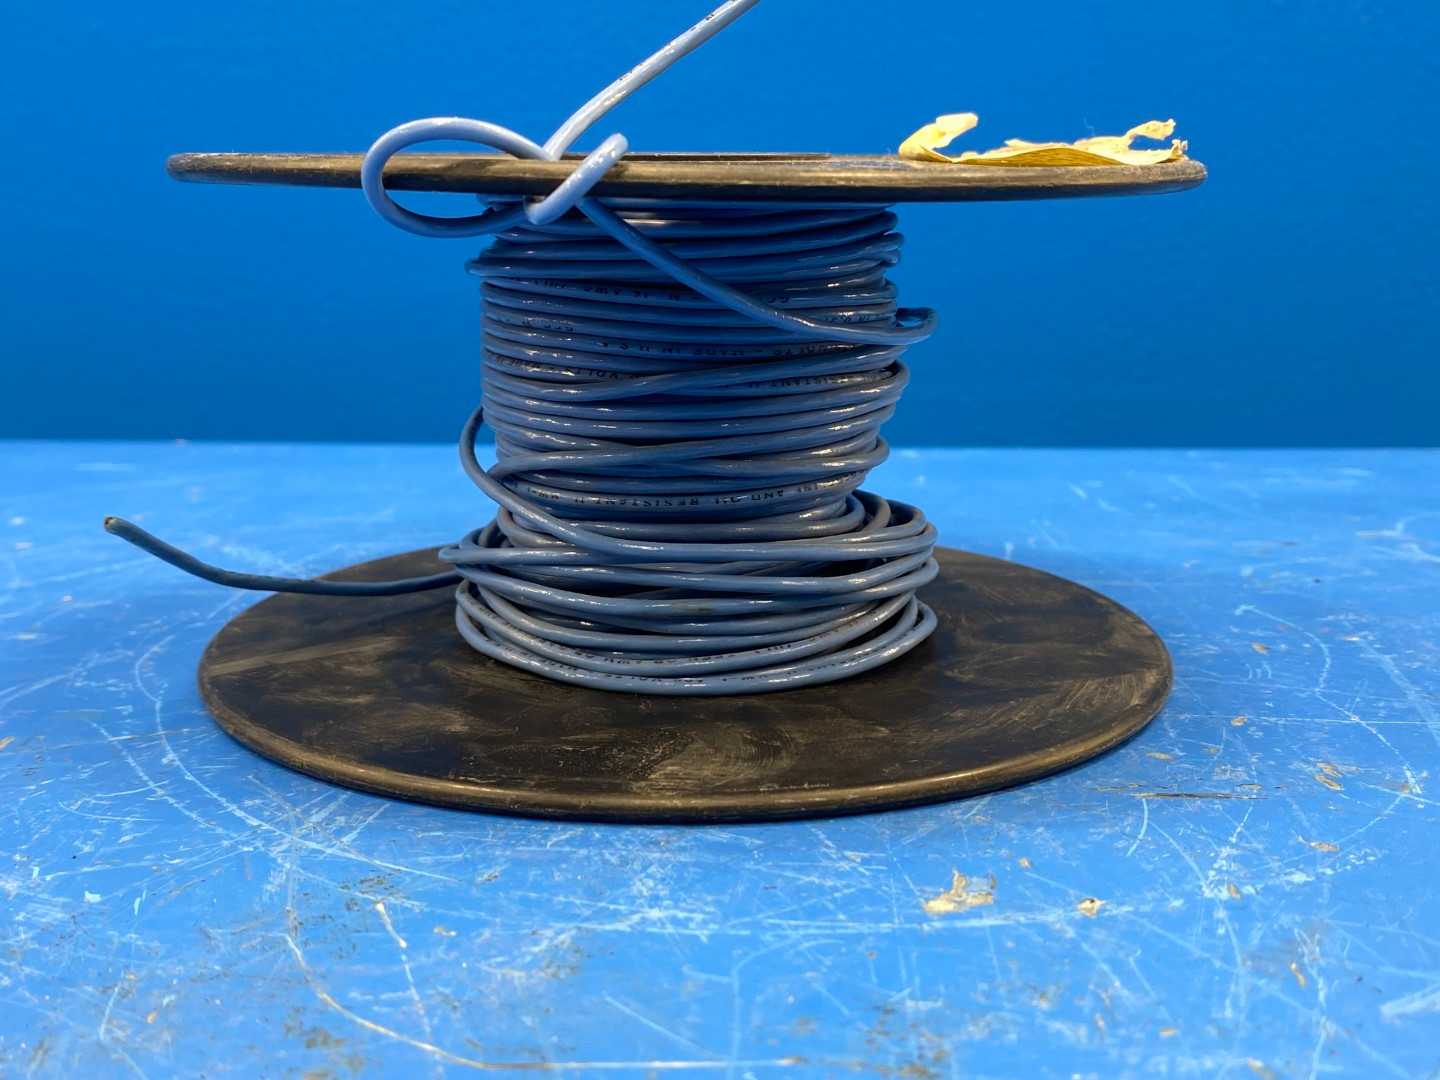 16 Awg Light Blue Copper Wire Type TFFN or AWM 100ft